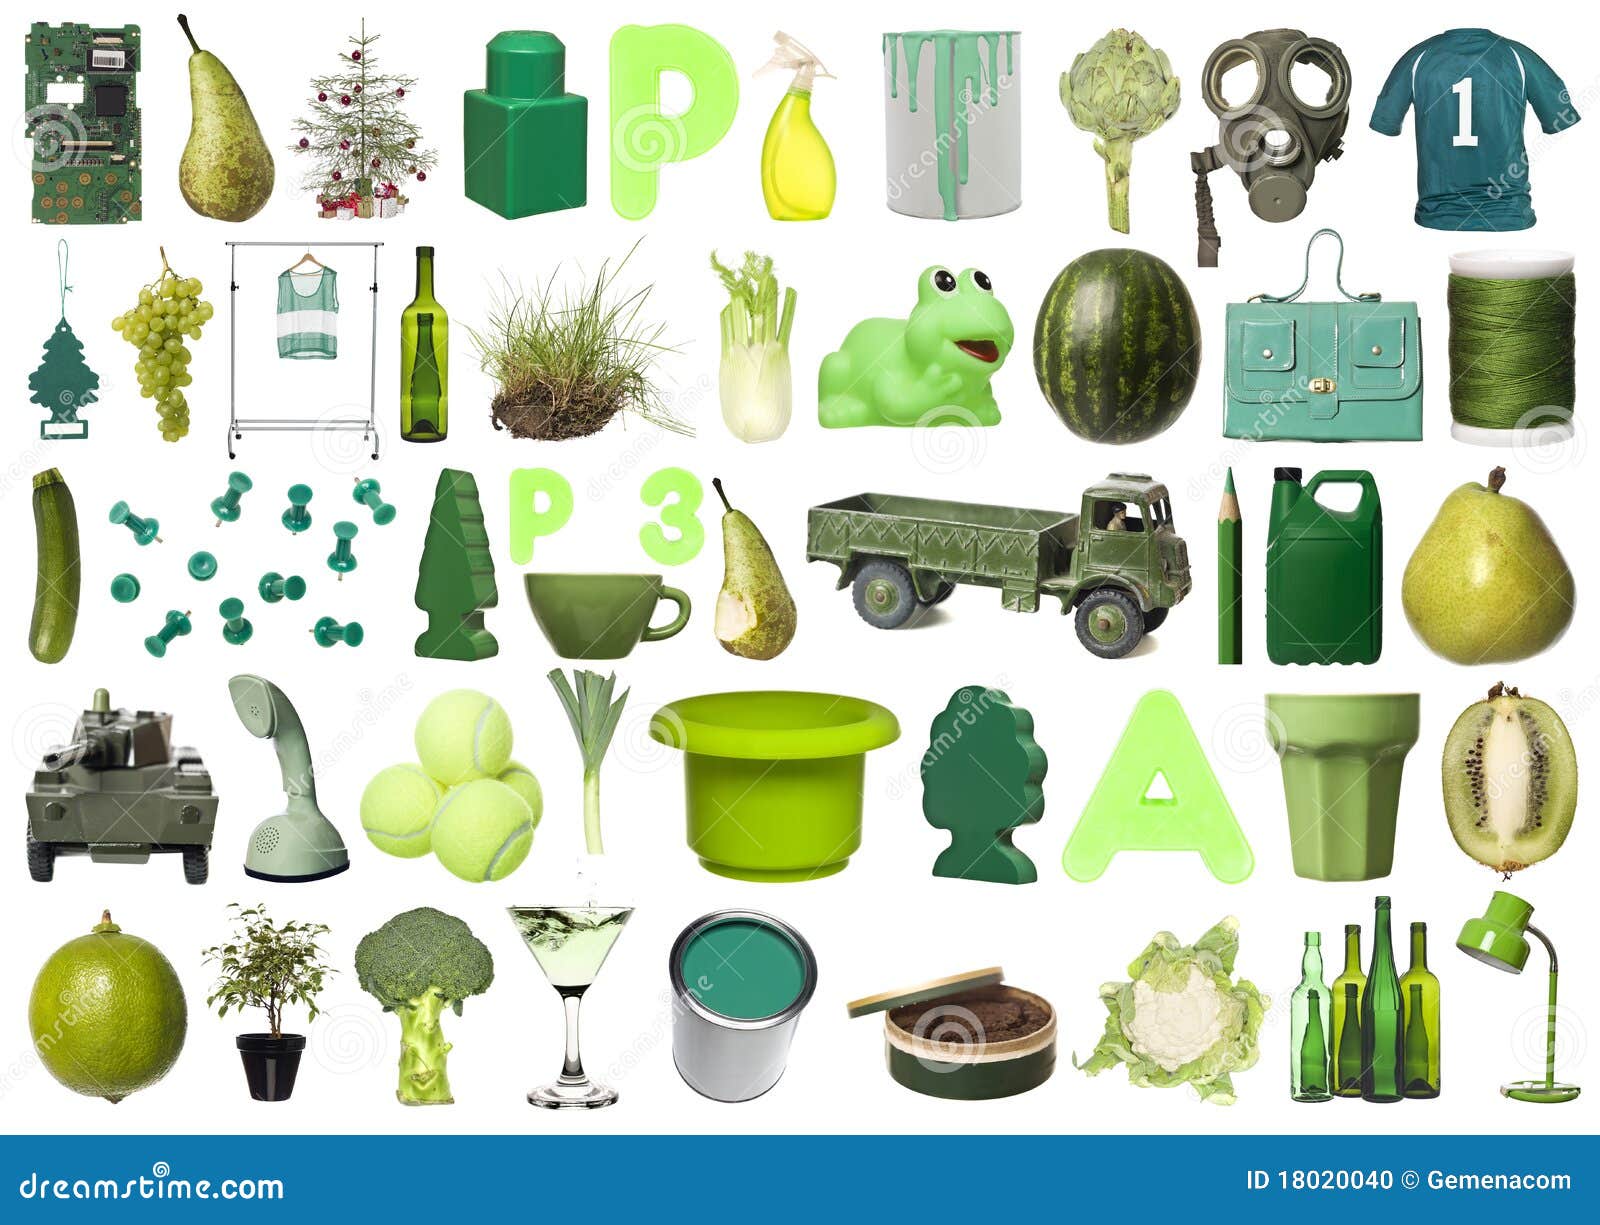 329,292 Green Objects Stock Photos - Free & Royalty-Free ...